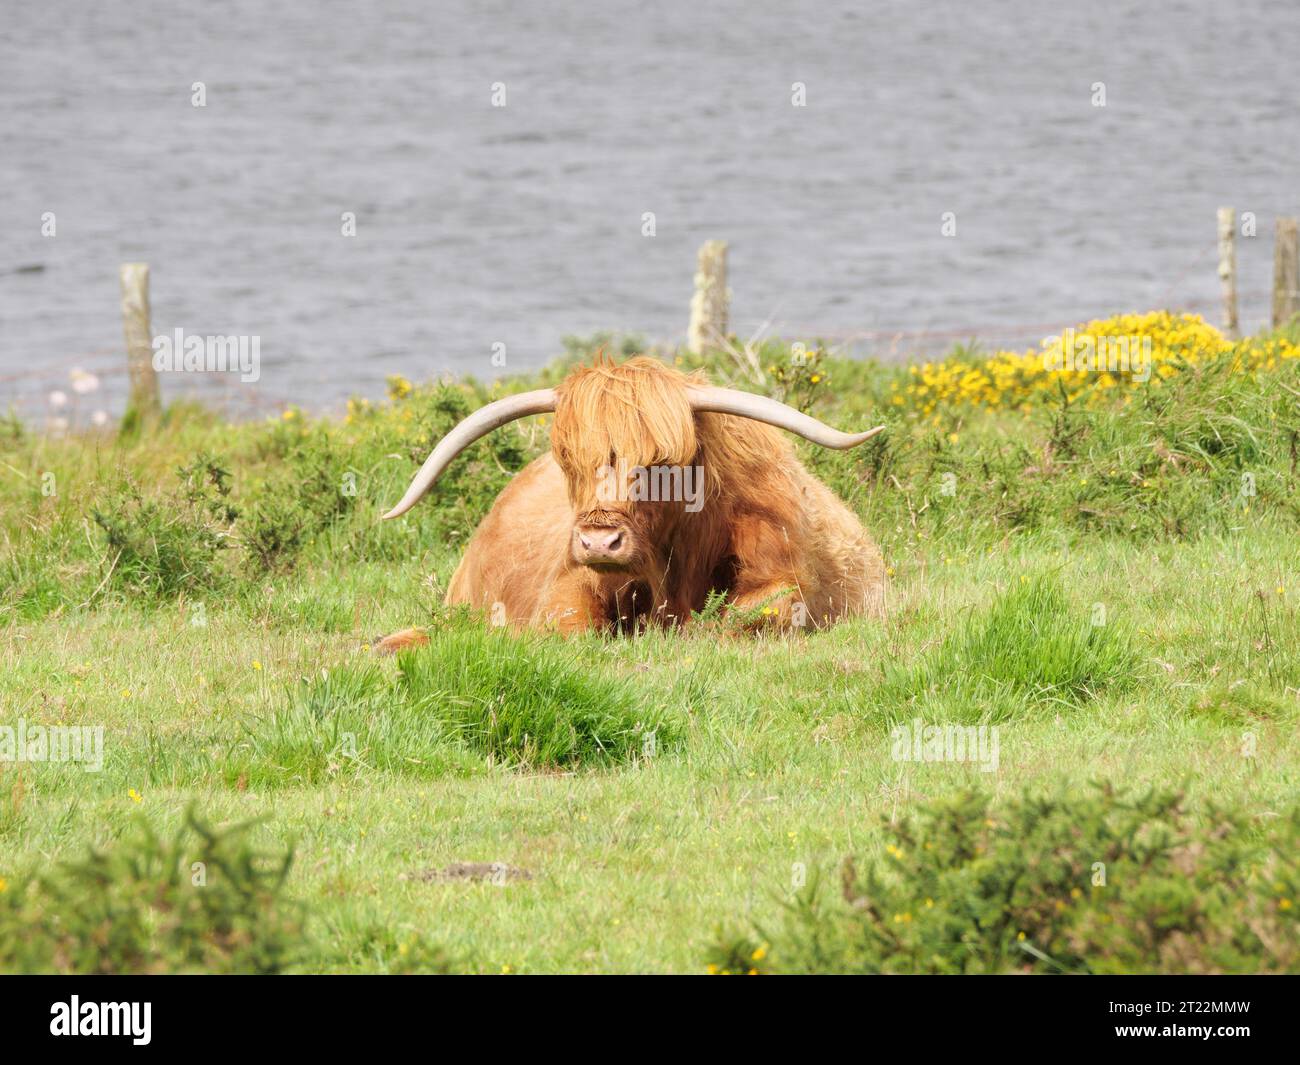 A Highland cattle with brown shaggy coat and big horns is lying on a green pasture Stock Photo